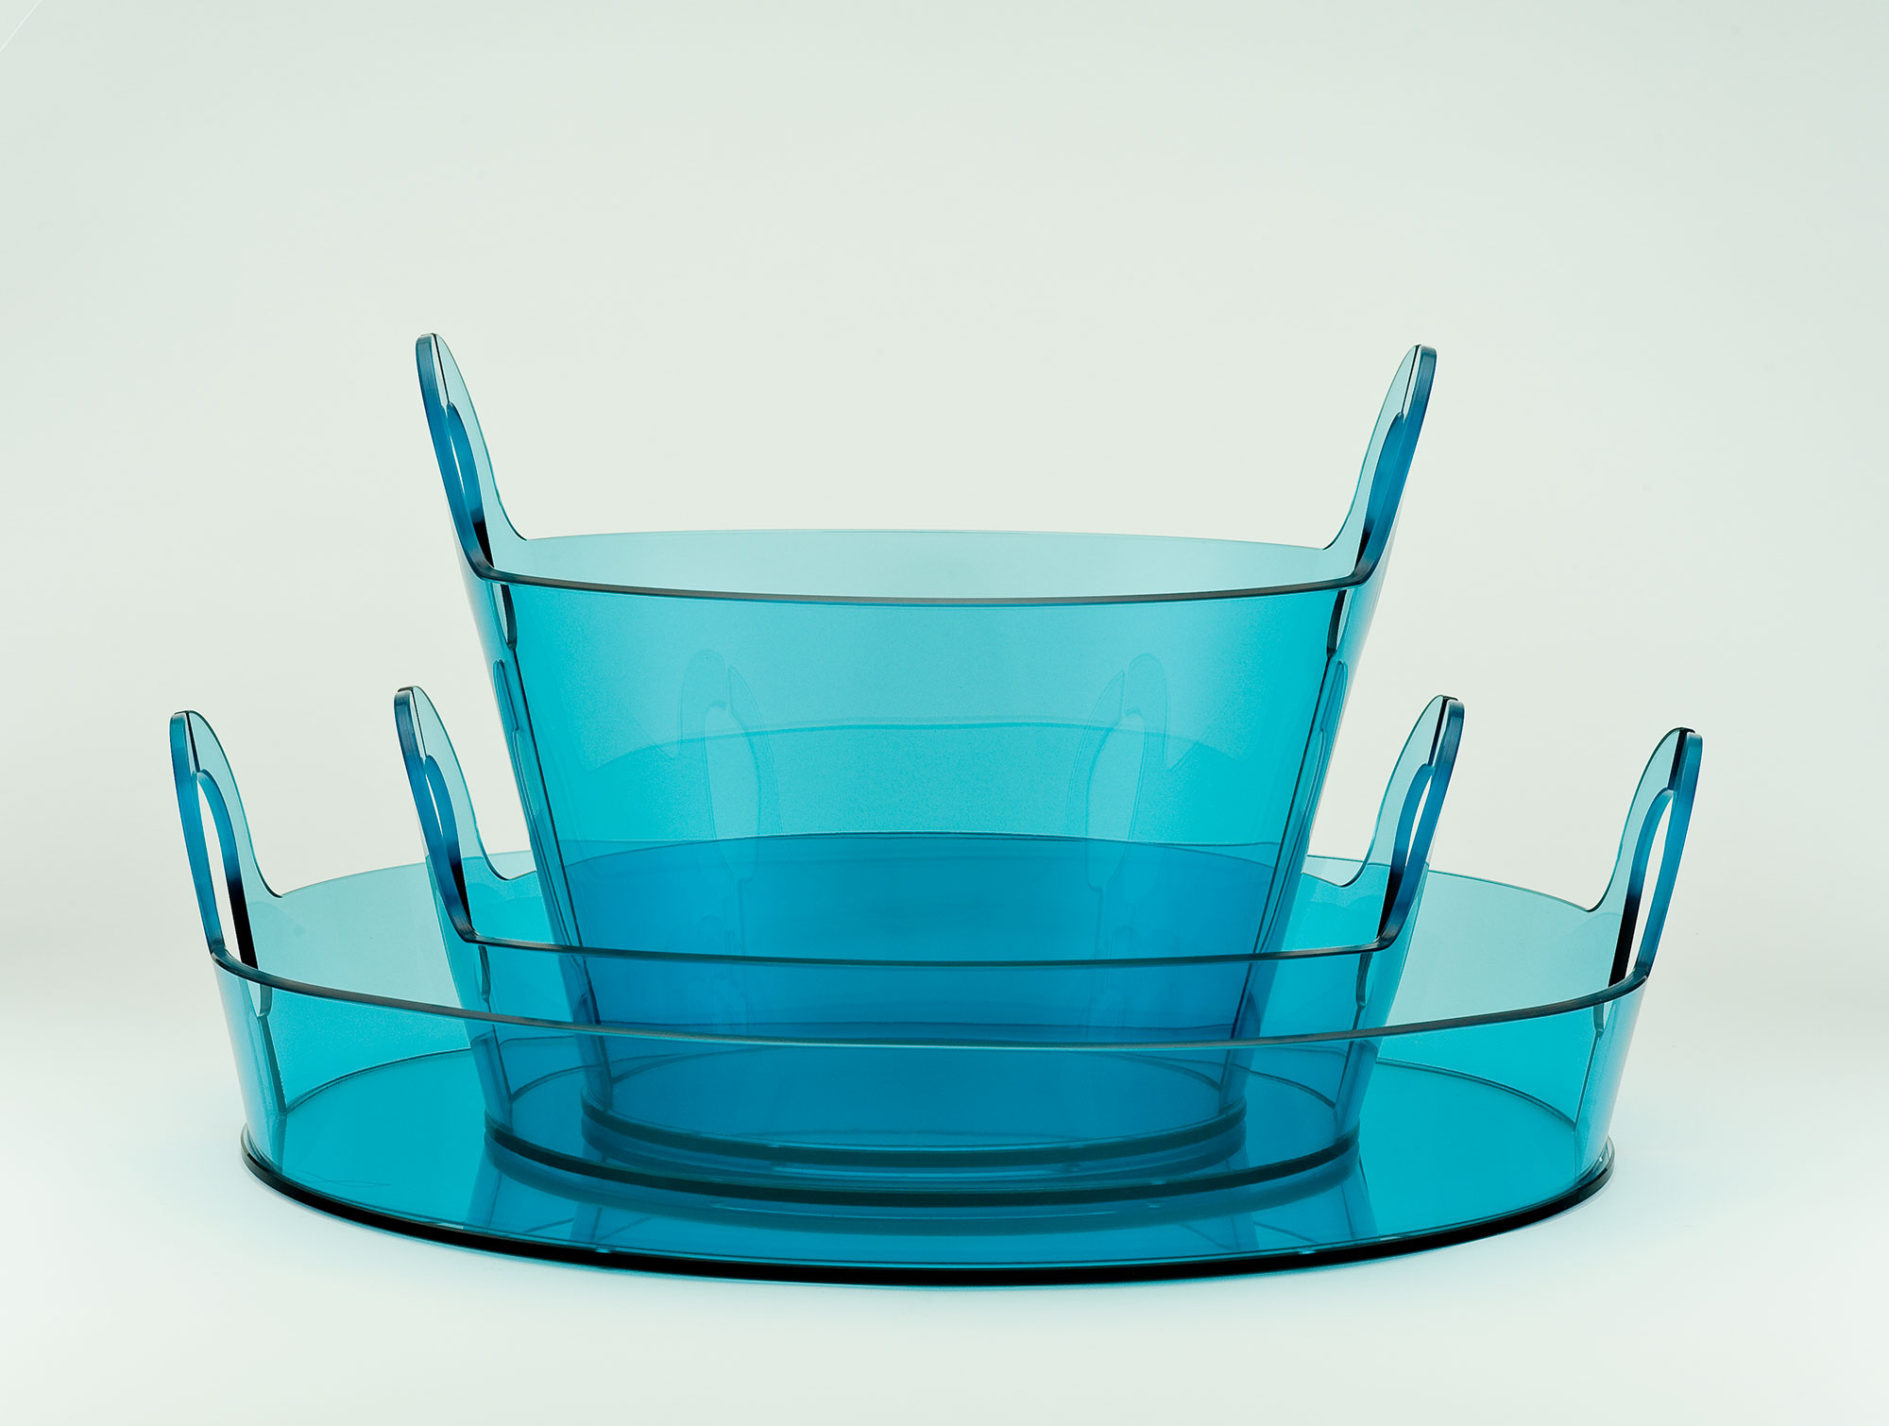 Set of circular nesting baskets of transparent blue glass in different sizes and proportions.